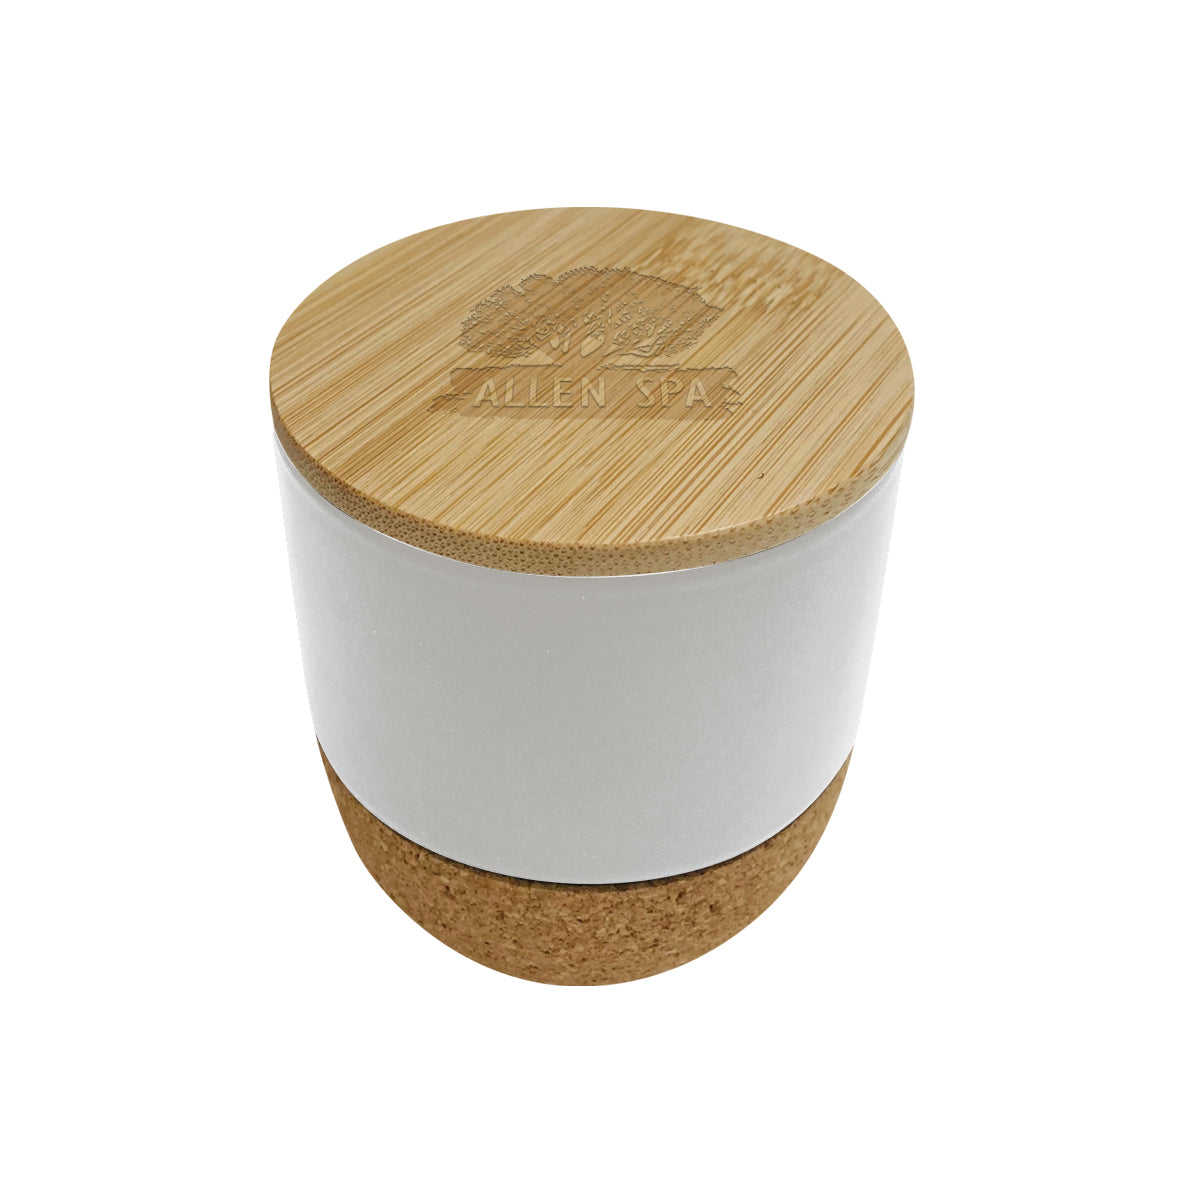 Santal Soy Wax Candle - Vanilla Scent in white with engraved logo.